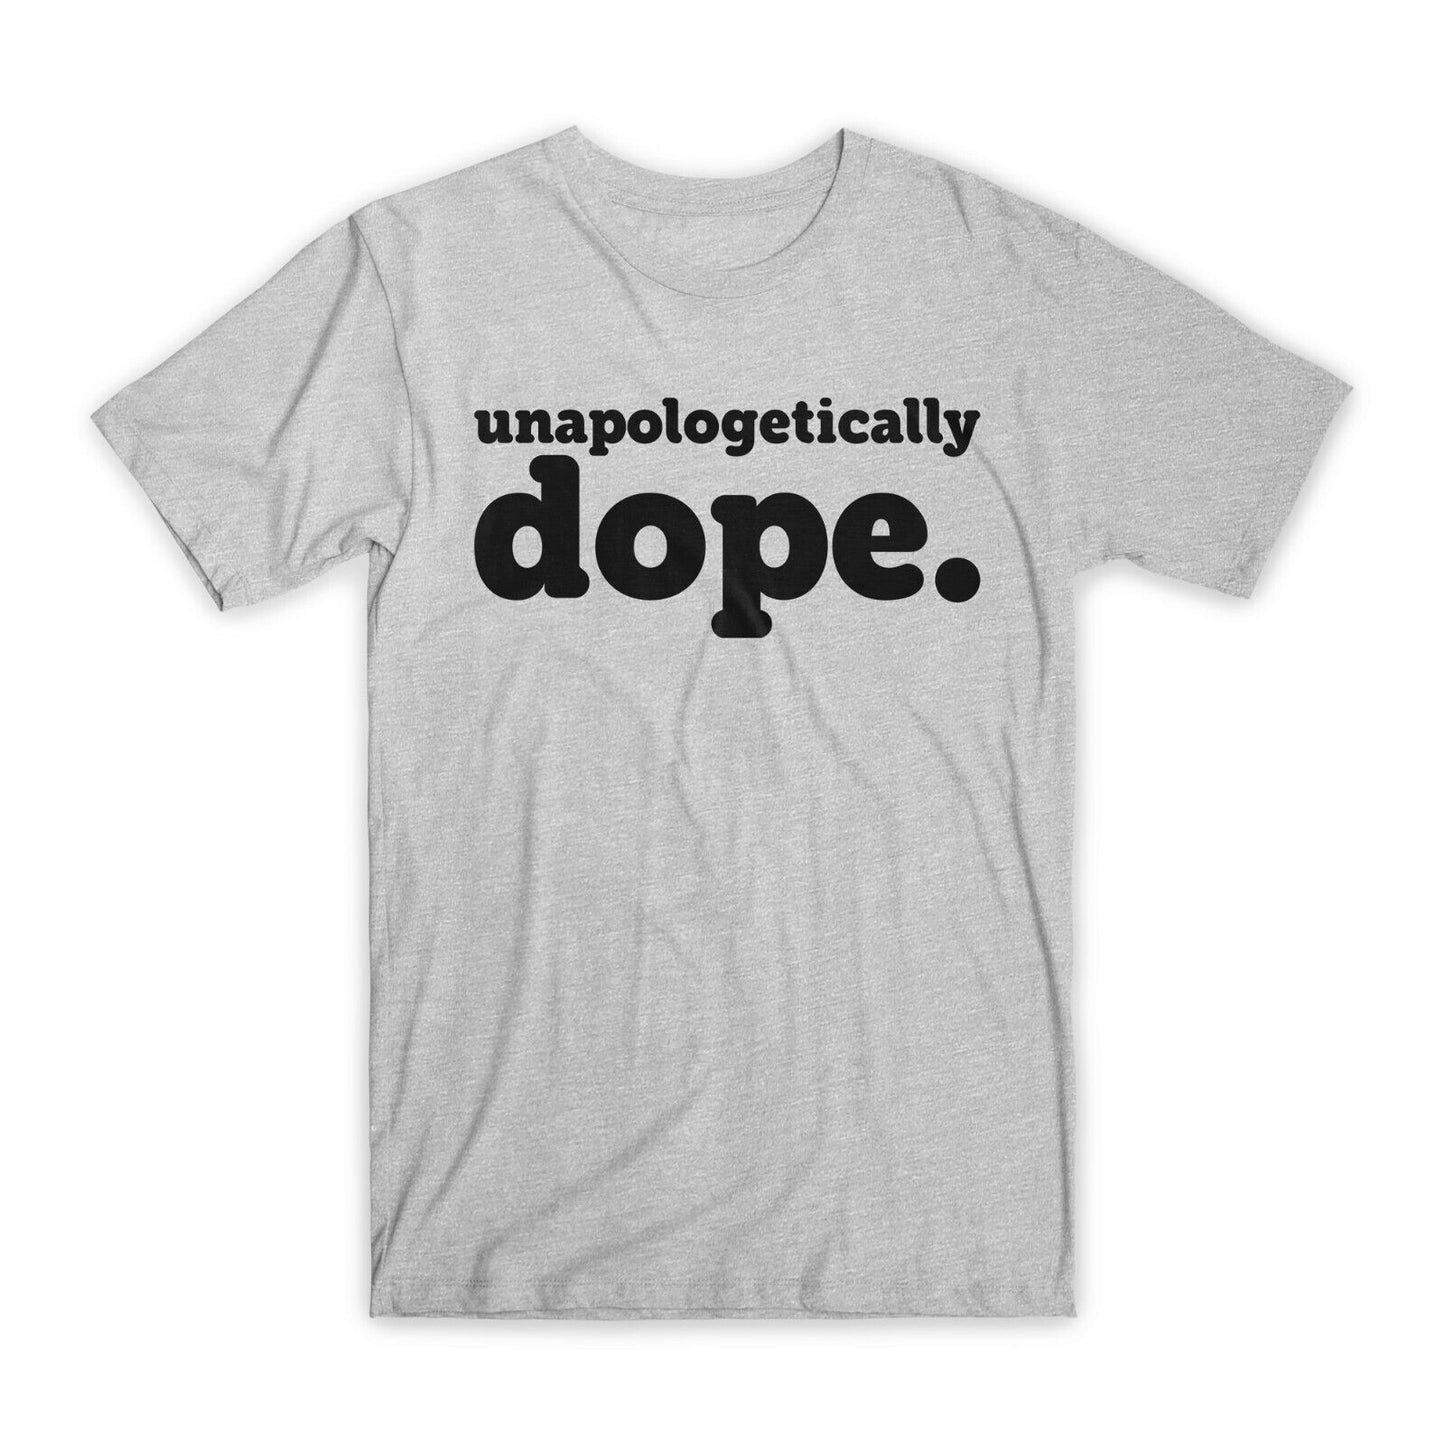 Unapologetically Dope T-Shirt Premium Soft Cotton Crew Neck Funny Tees Gifts NEW